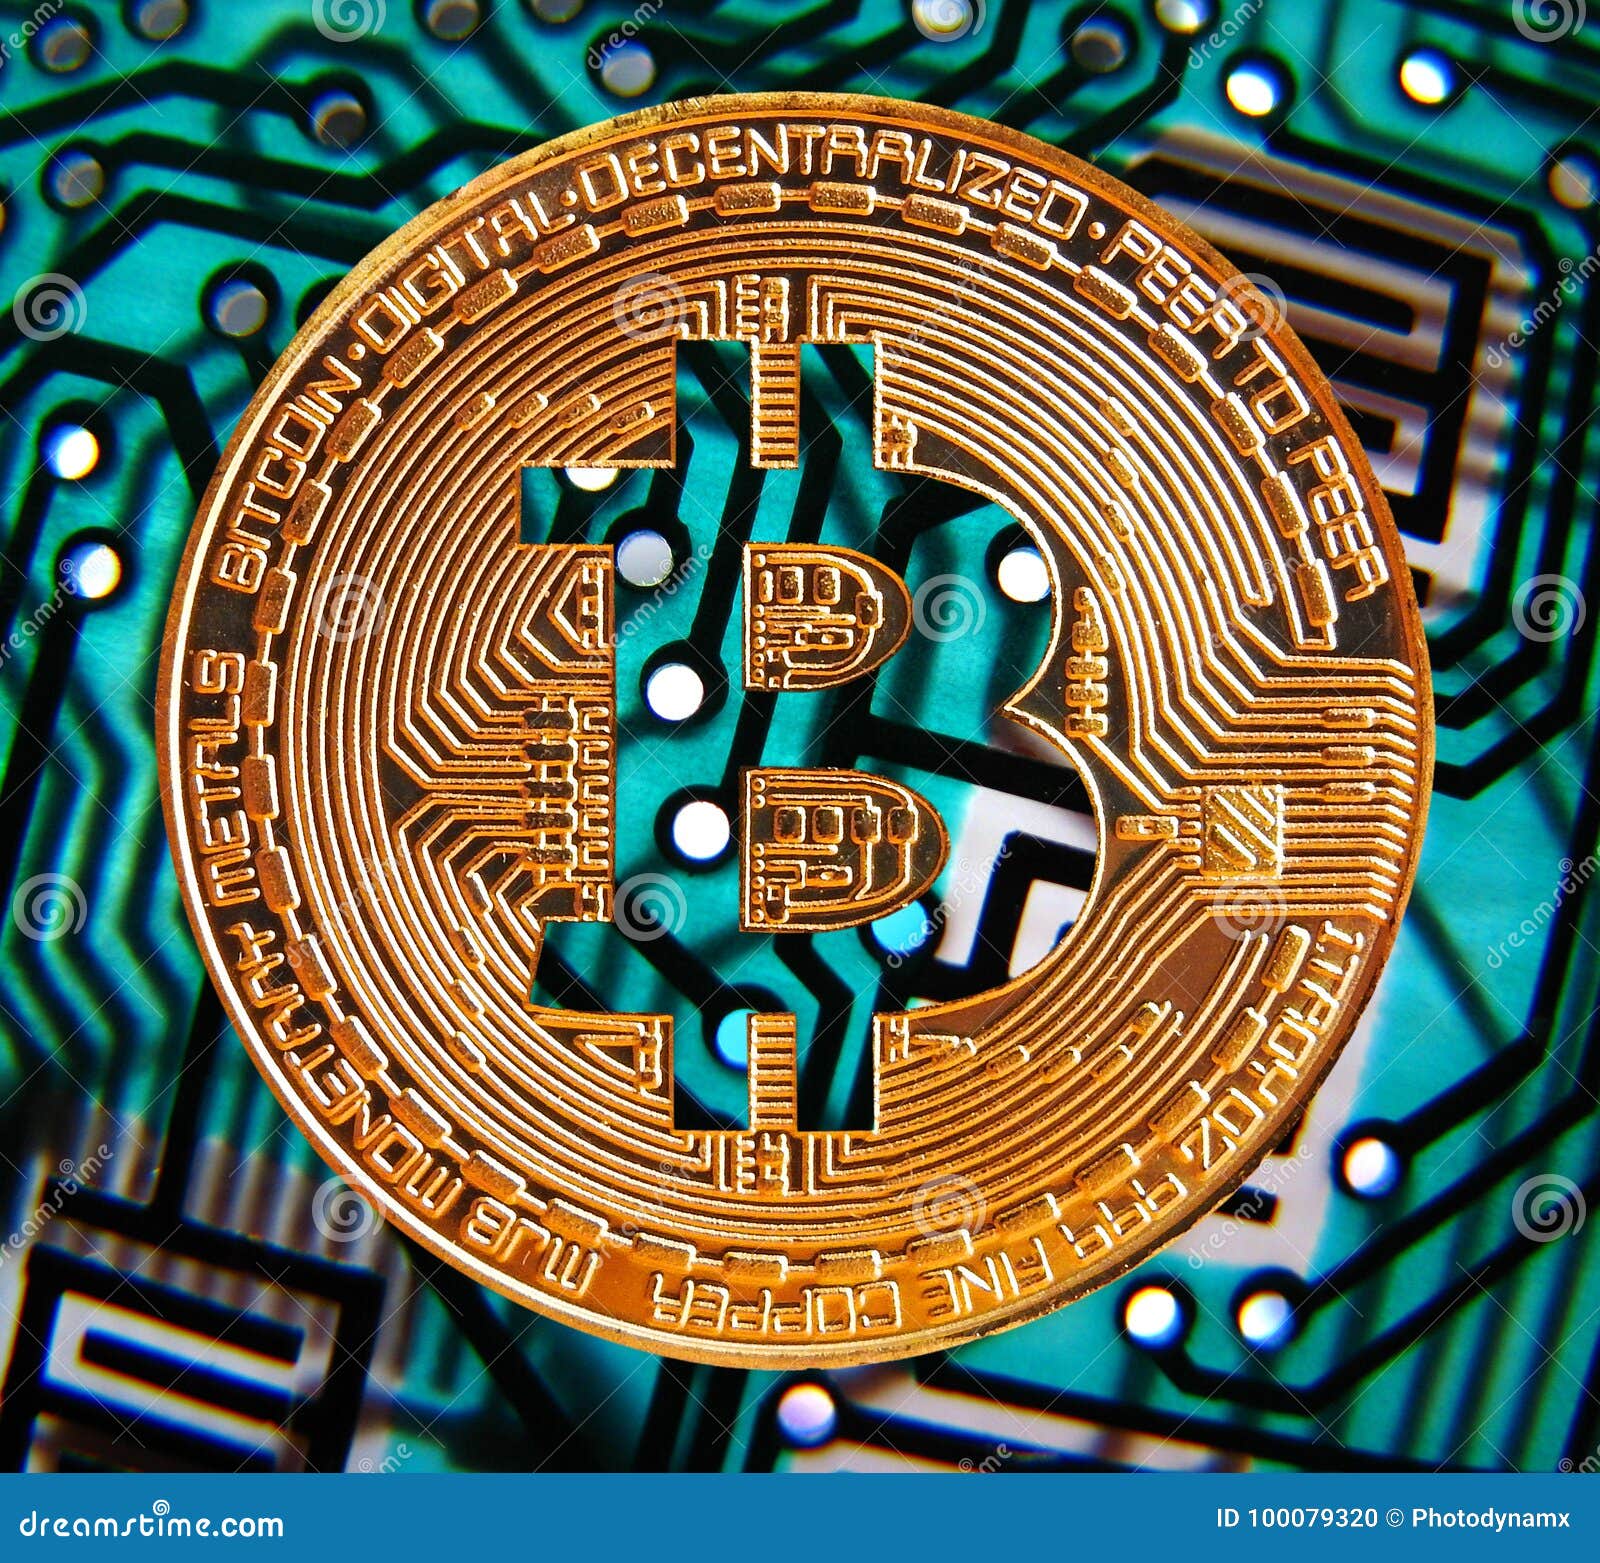 Bitcoin Cryptocurrency : Is the Bitcoin party over? Why ...